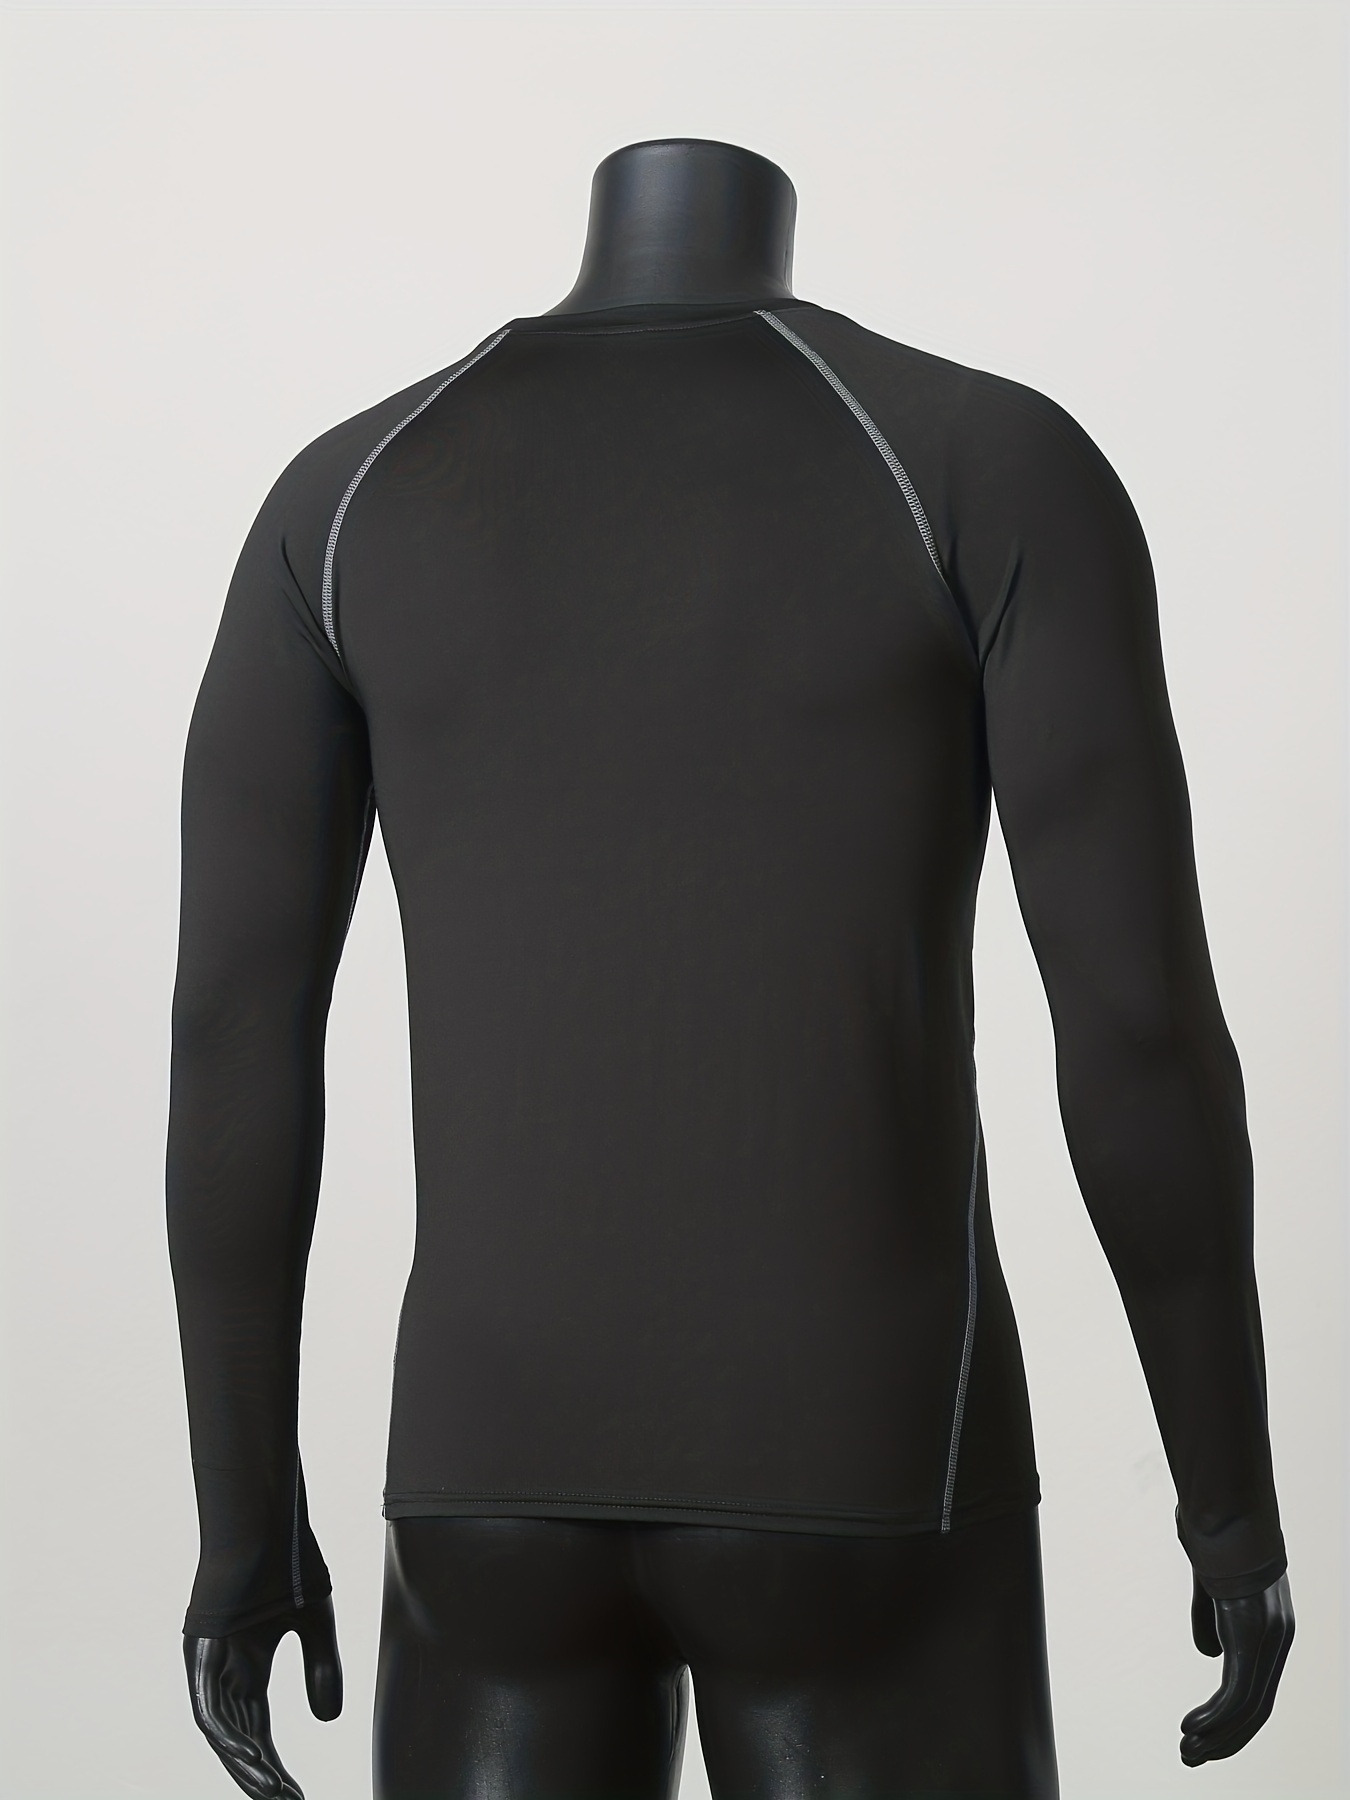 Long Sleeve Fleece Base Layer Compression Shirt in Black and White